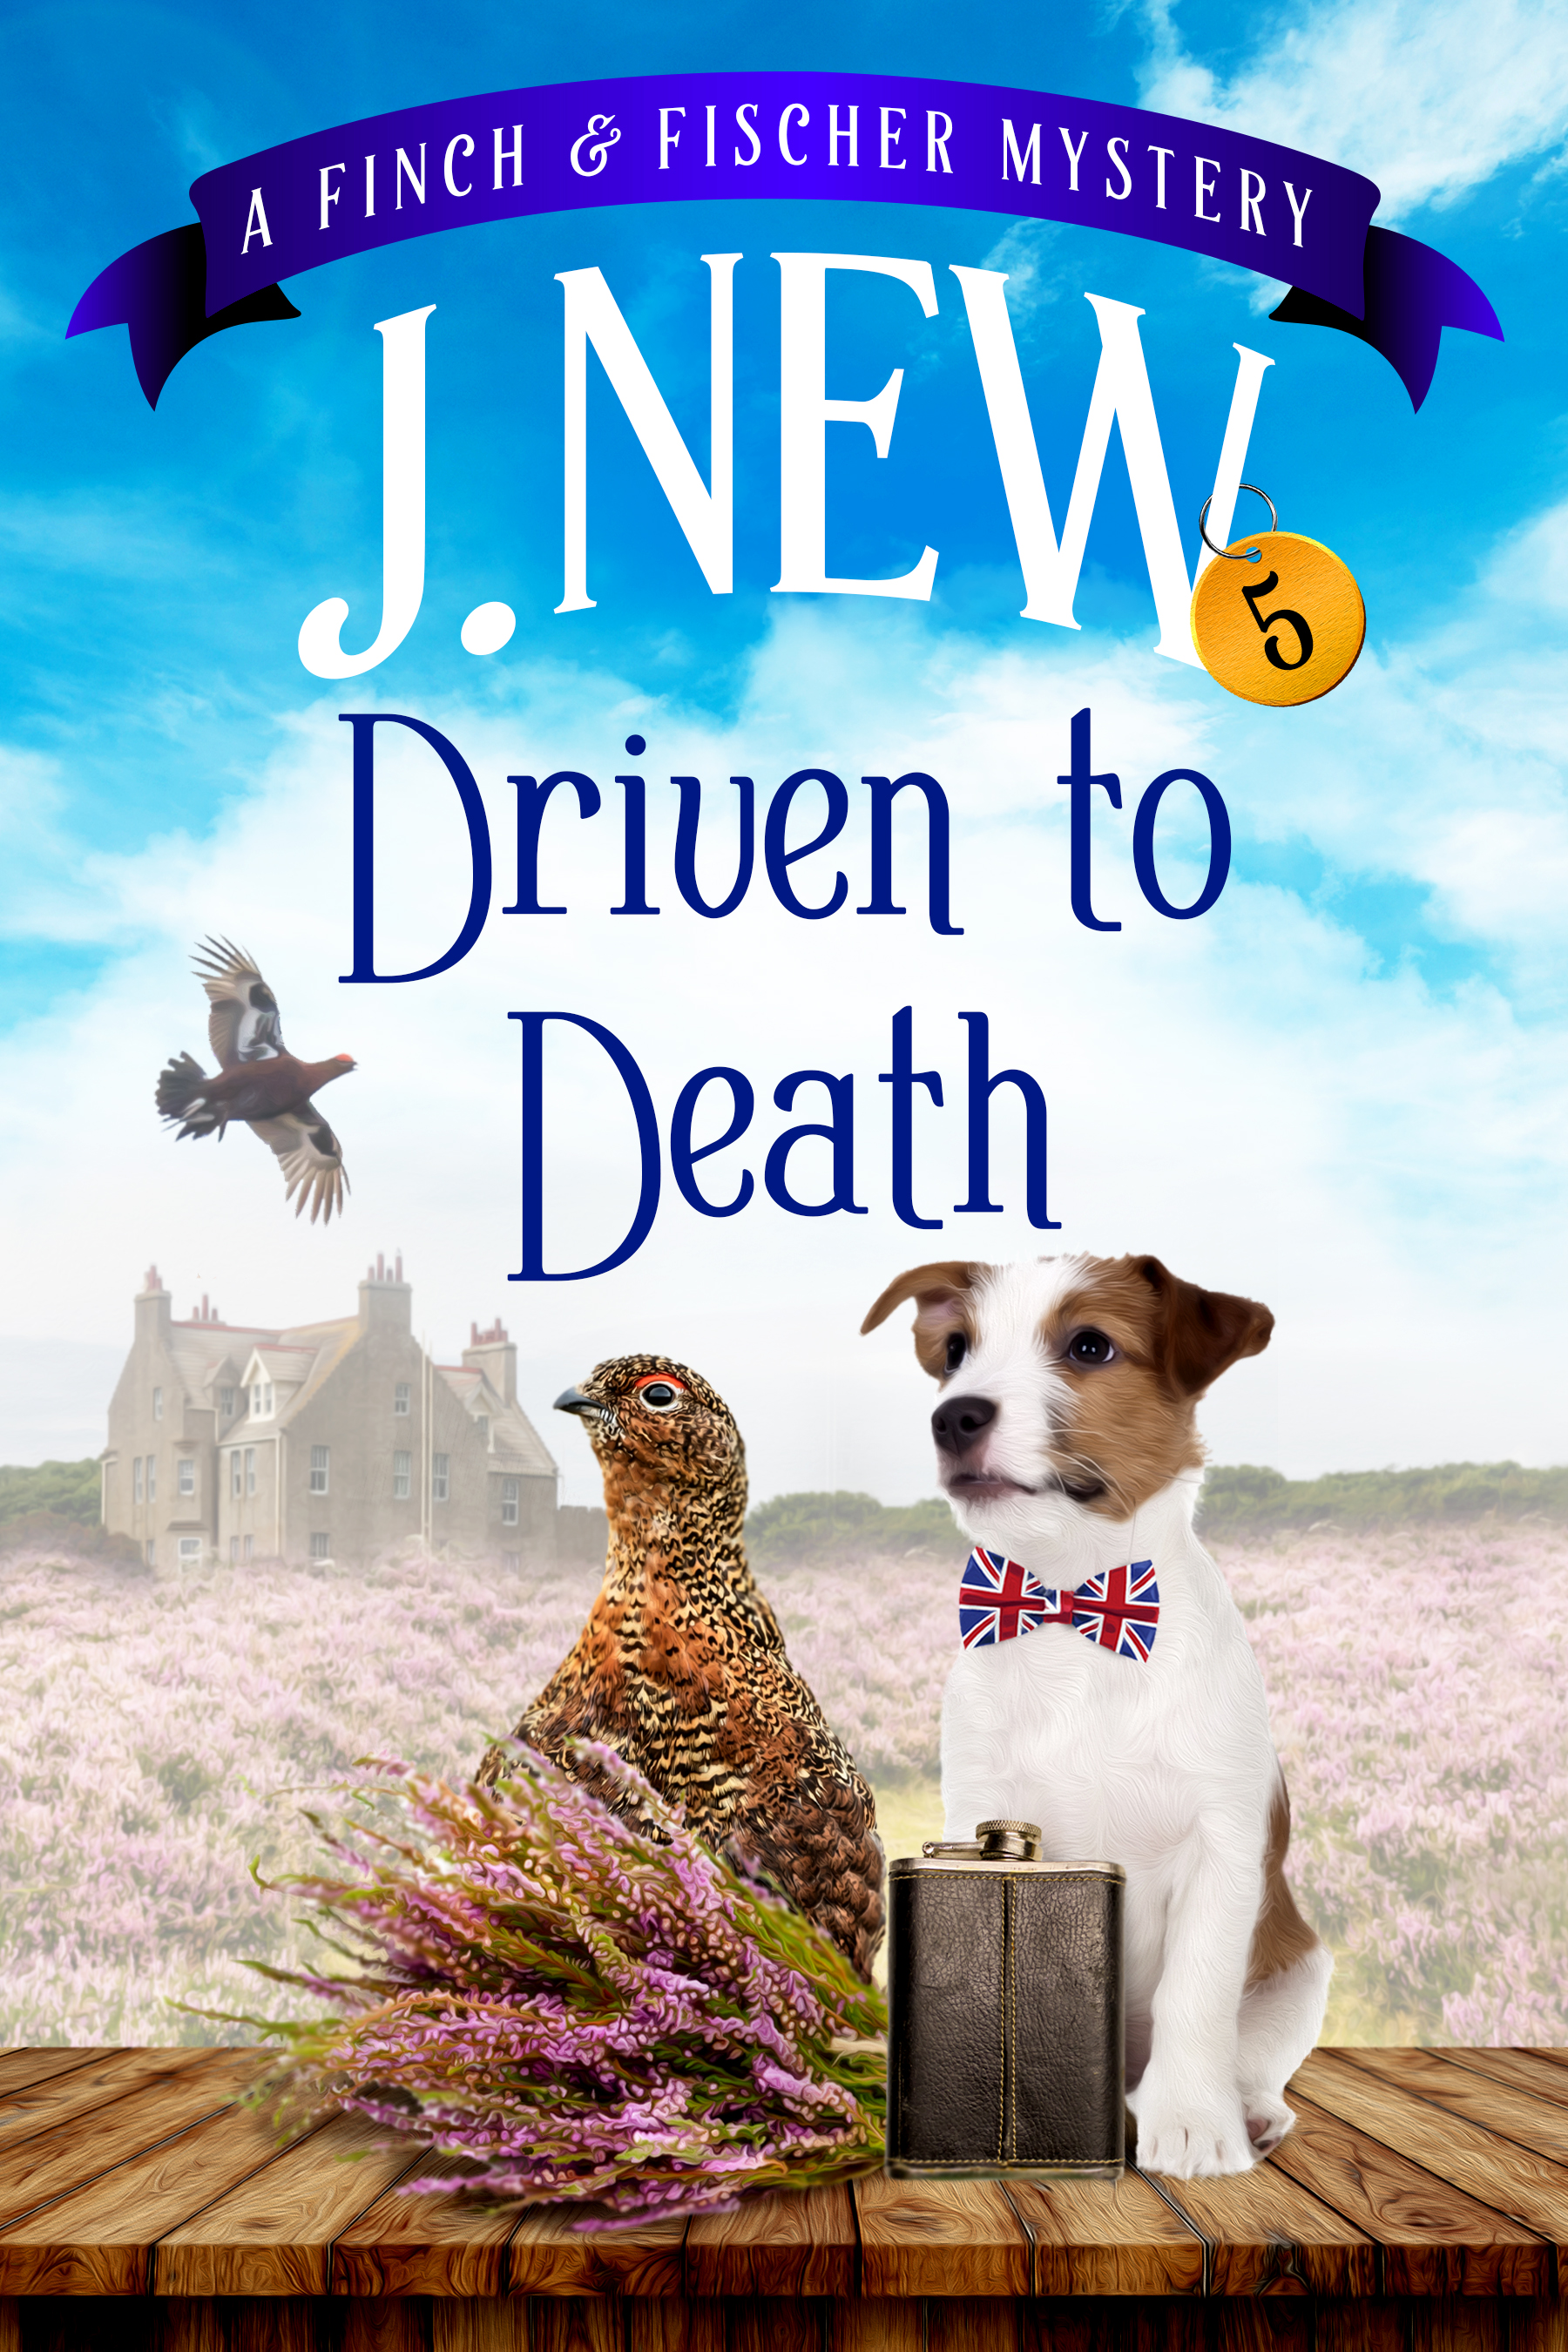 Driven to Death book 5 in the best selling Finch & Fischer cozy mystery series by British author J. New